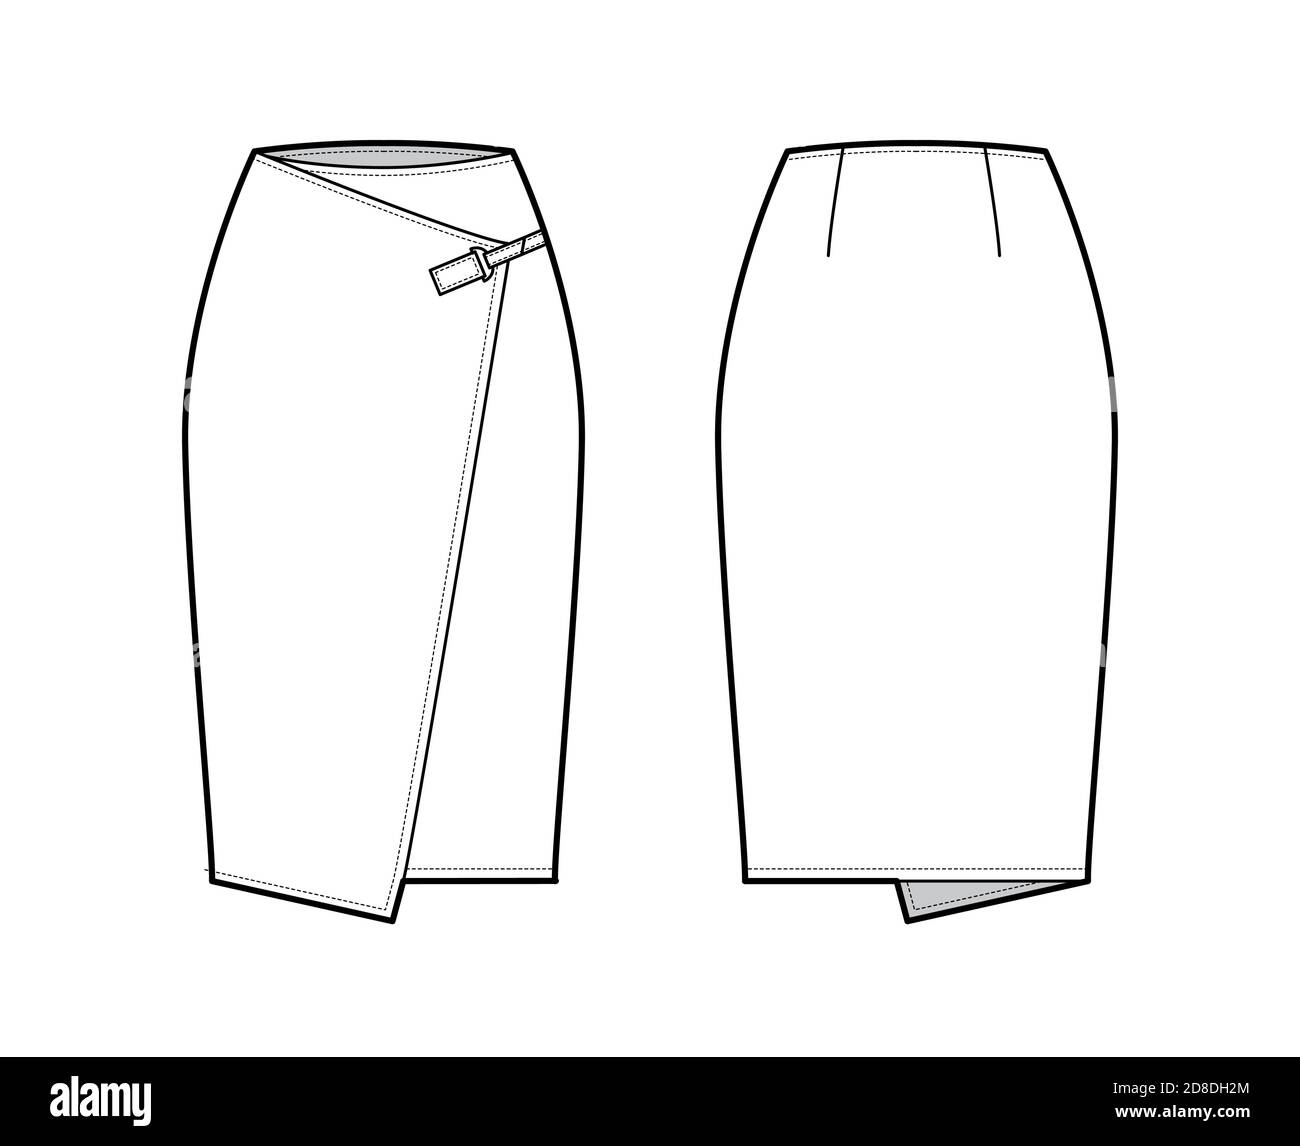 Skirt wrap technical fashion illustration with straight knee silhouette ...